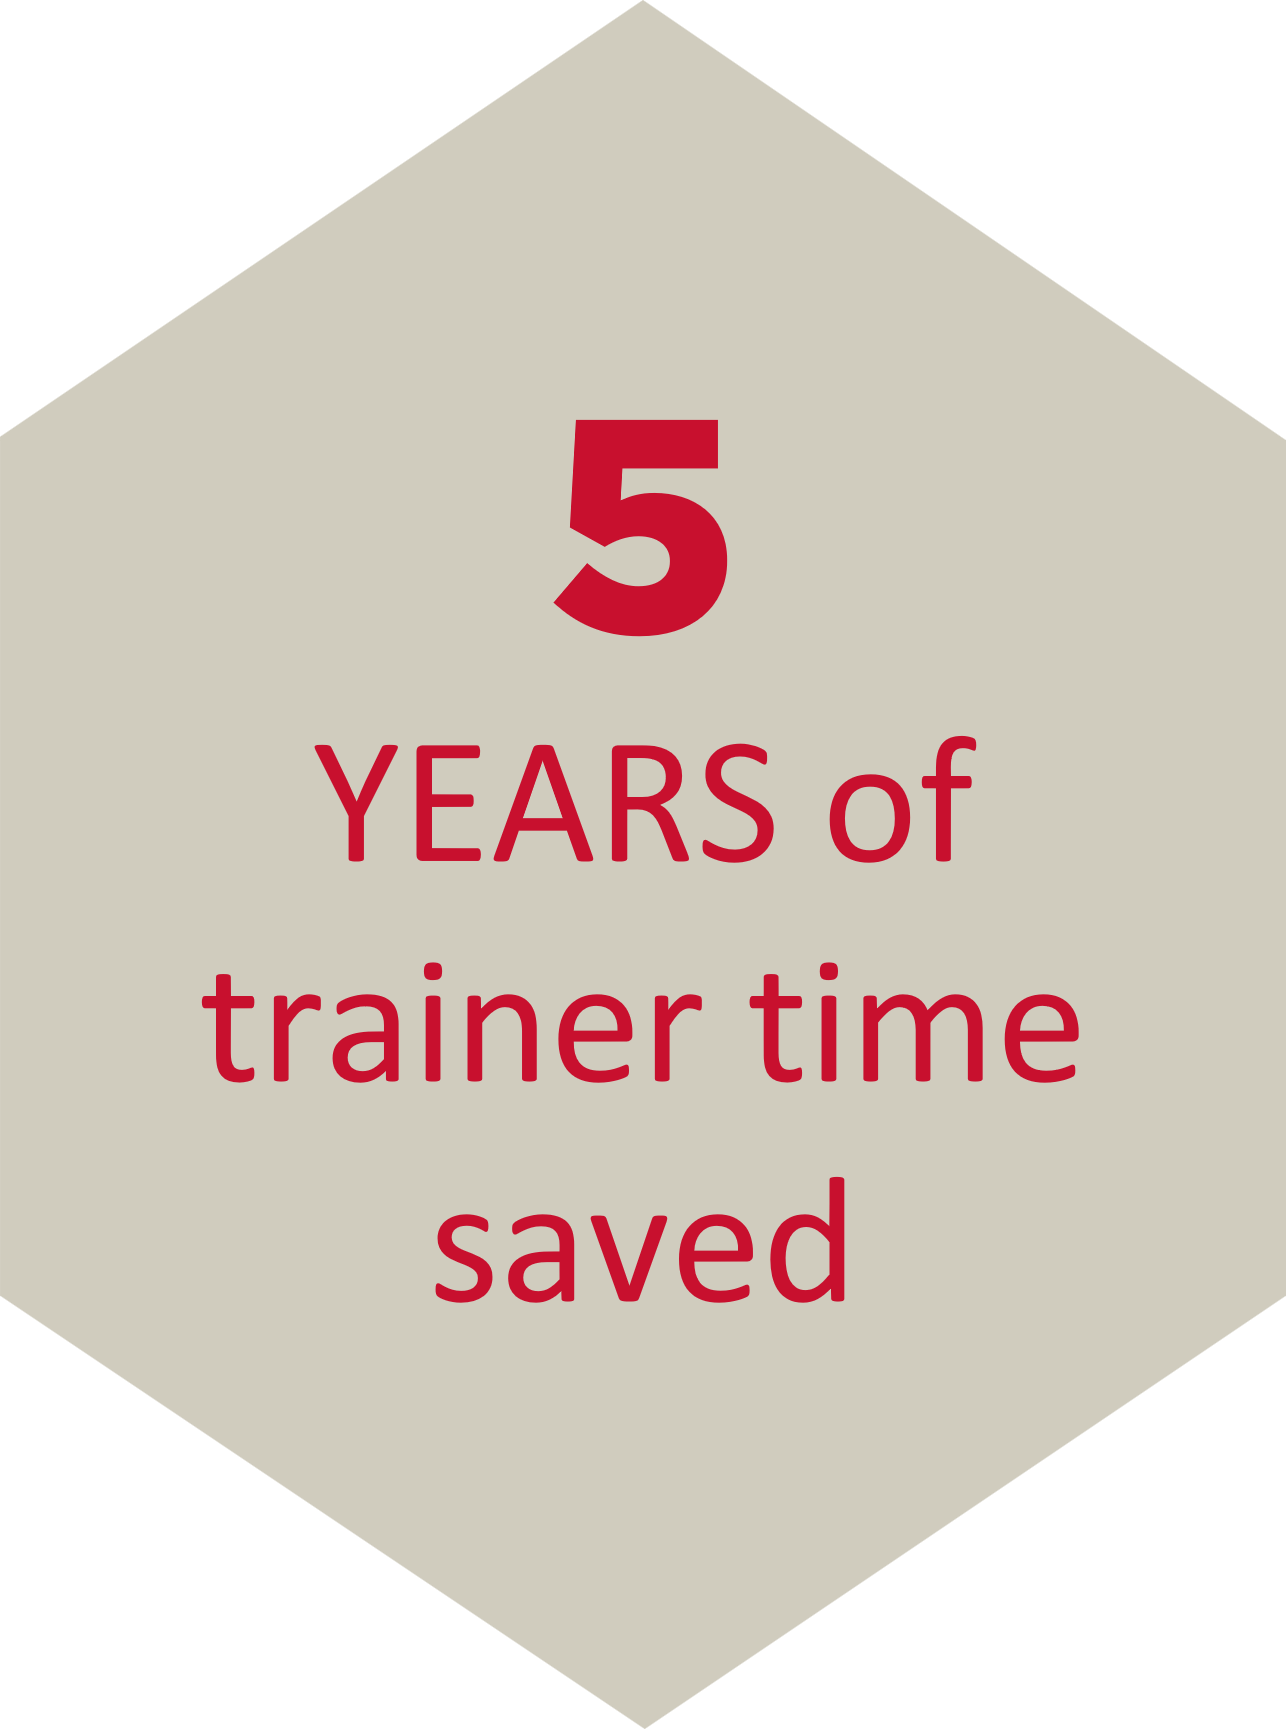 A grey hexagon with red text within it saying '5 years of trainer time saved'.